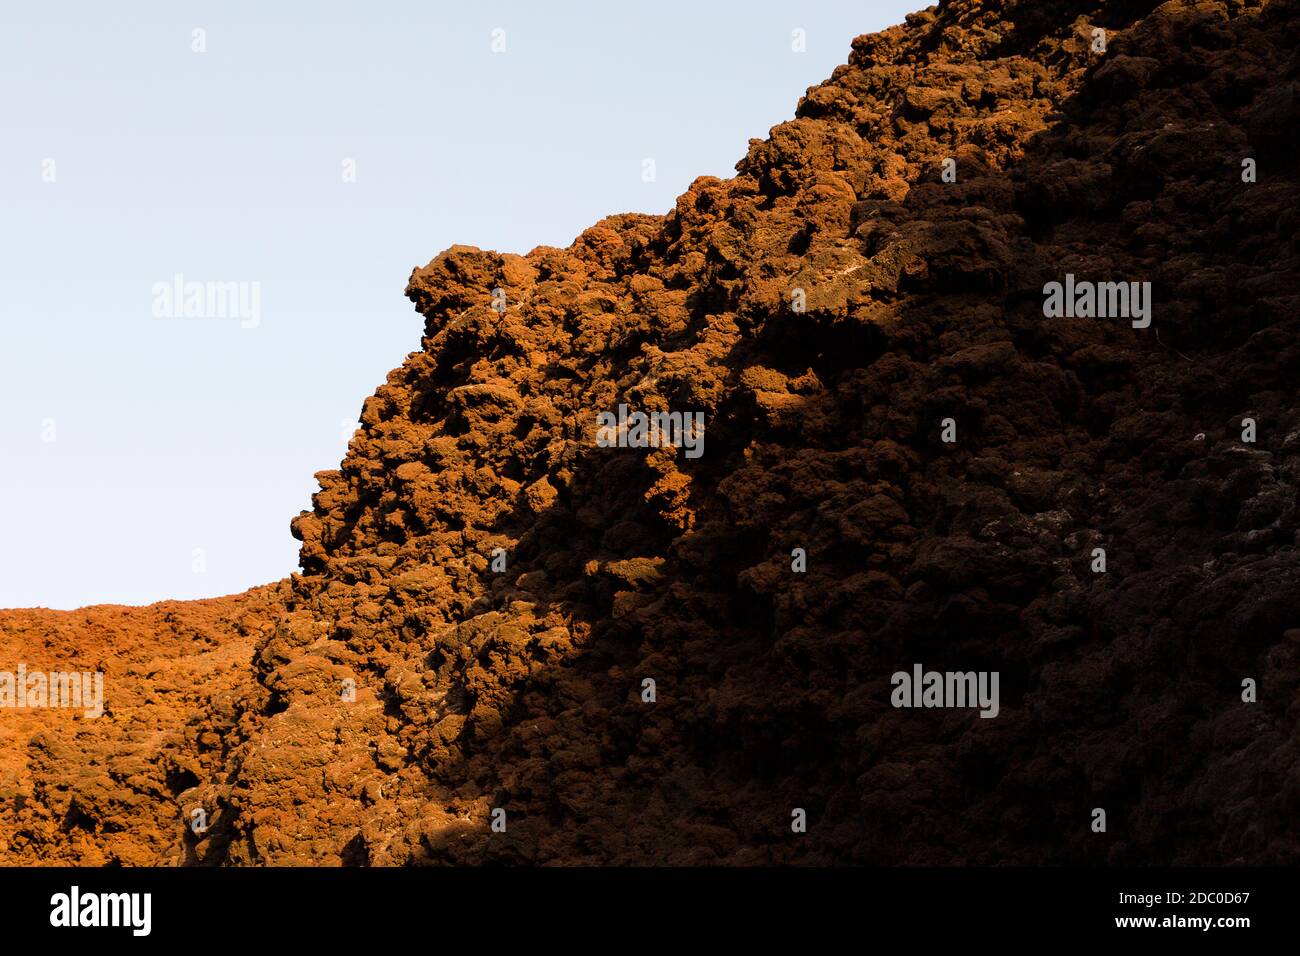 Sicily, Italy. Detail view of volcanic rock found at the Silvestri Inferiore crater near the summit of Mt Etna. Stock Photo